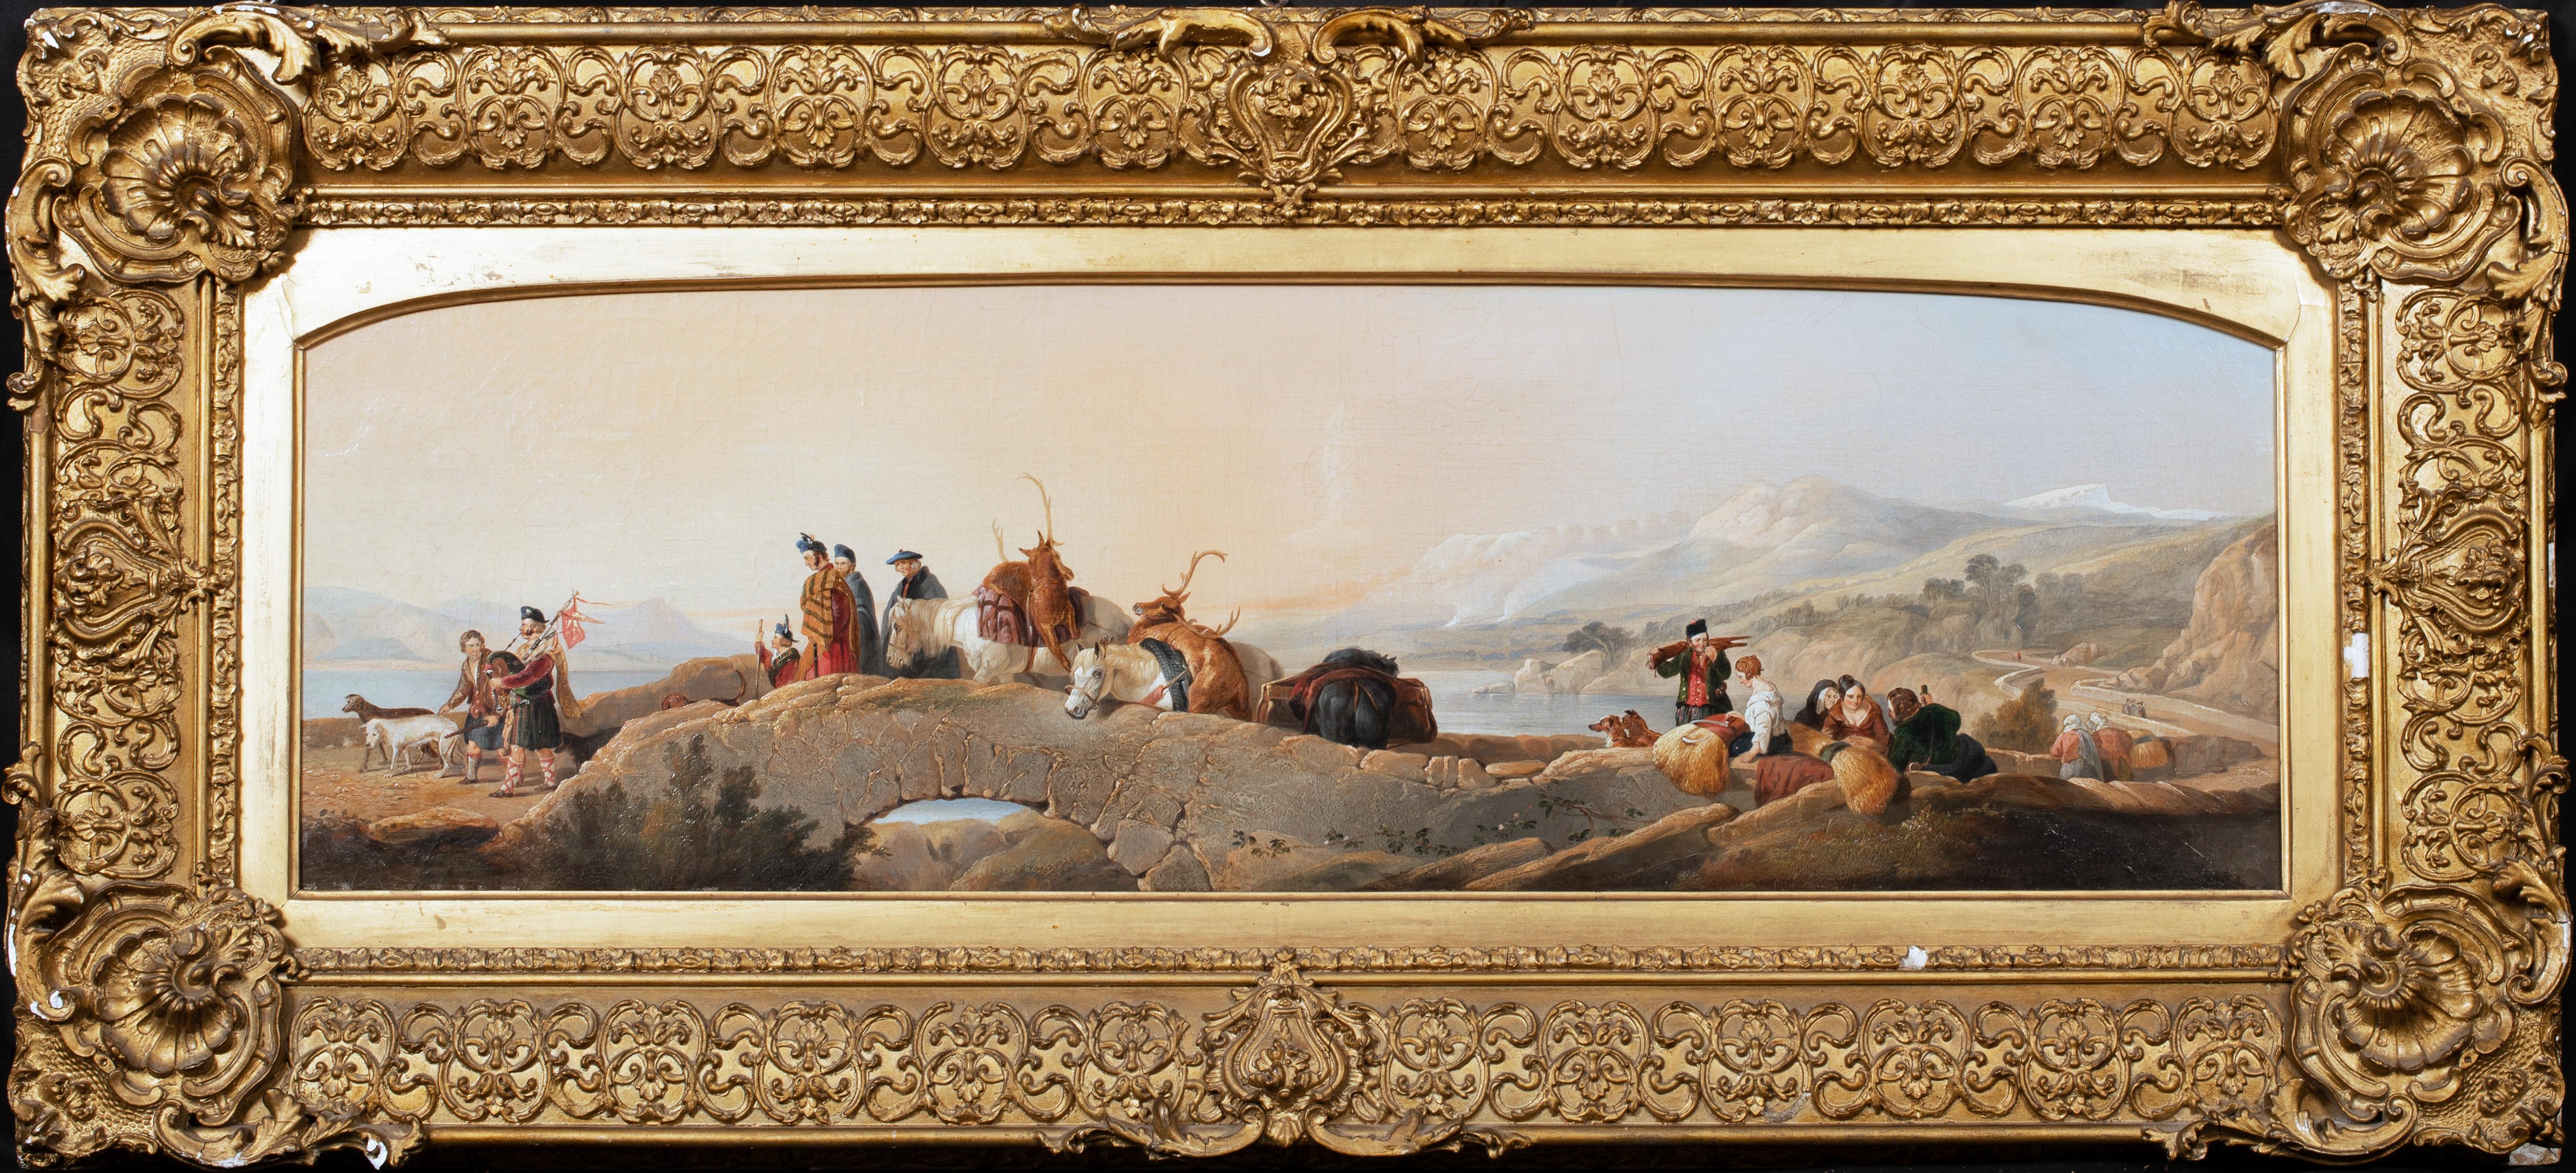 Unknown Landscape Painting - Return From The Stag Hunt, 19th Century  Signed "TS"  Large 19th Century